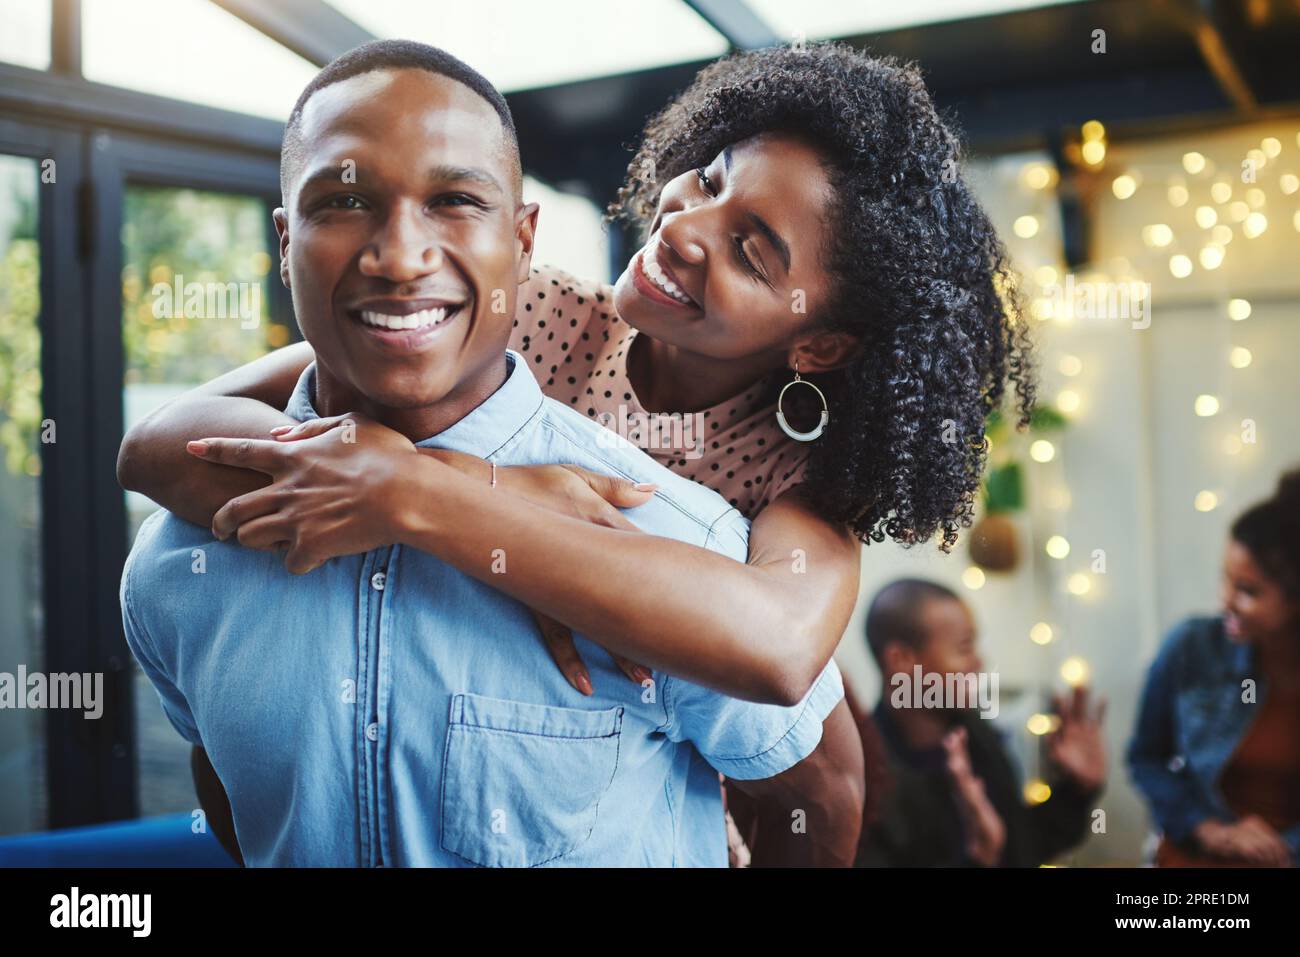 Date night is the best night of the week. a happy young couple out on a date. Stock Photo